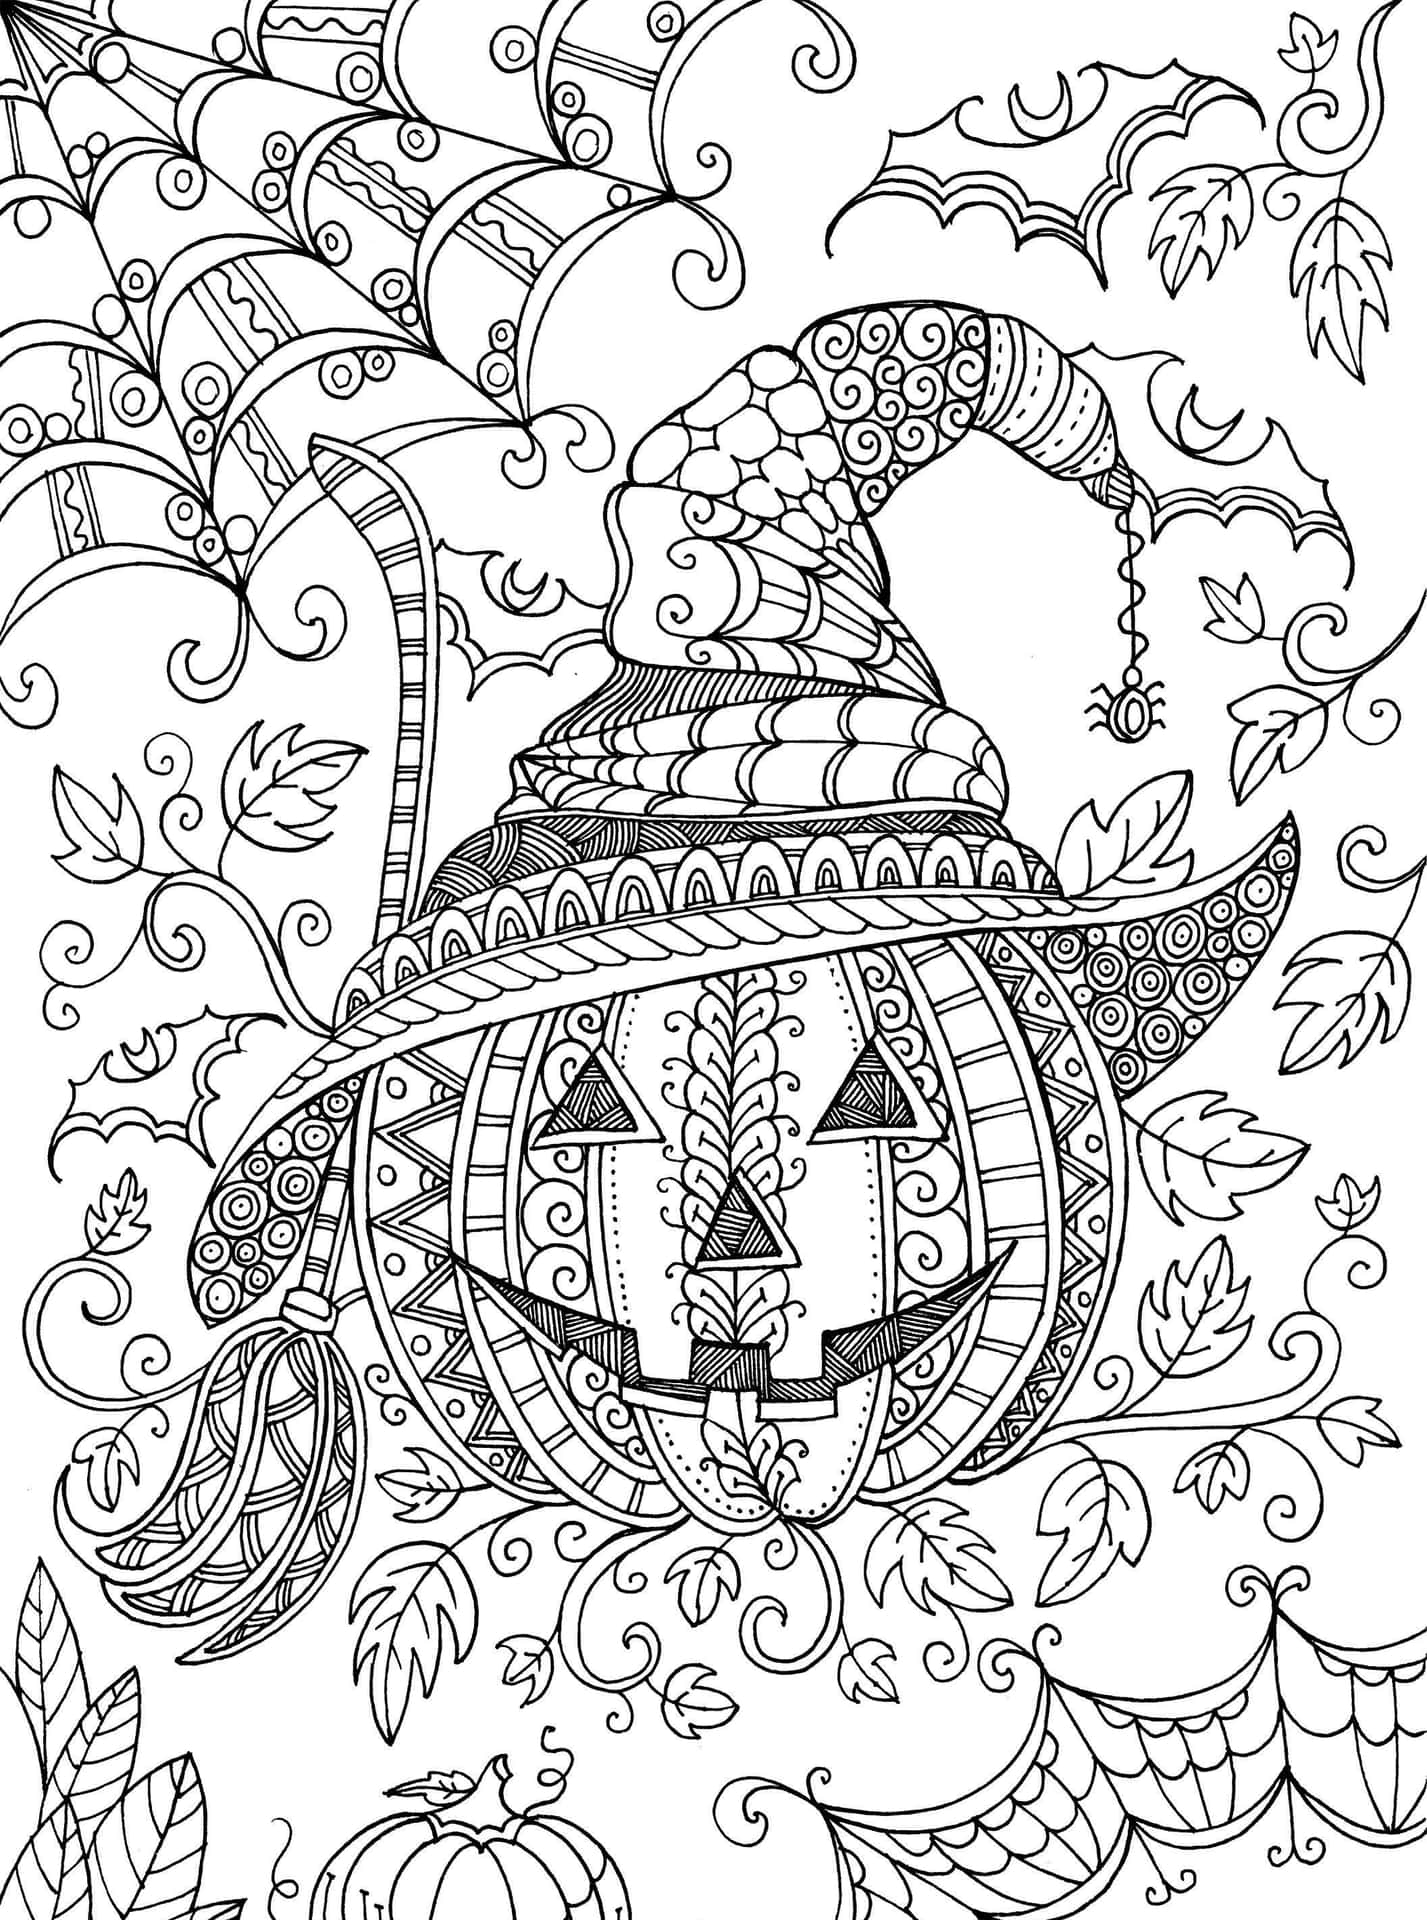 Download Fall Coloring Pictures 2113 X 2843 | Wallpapers.com